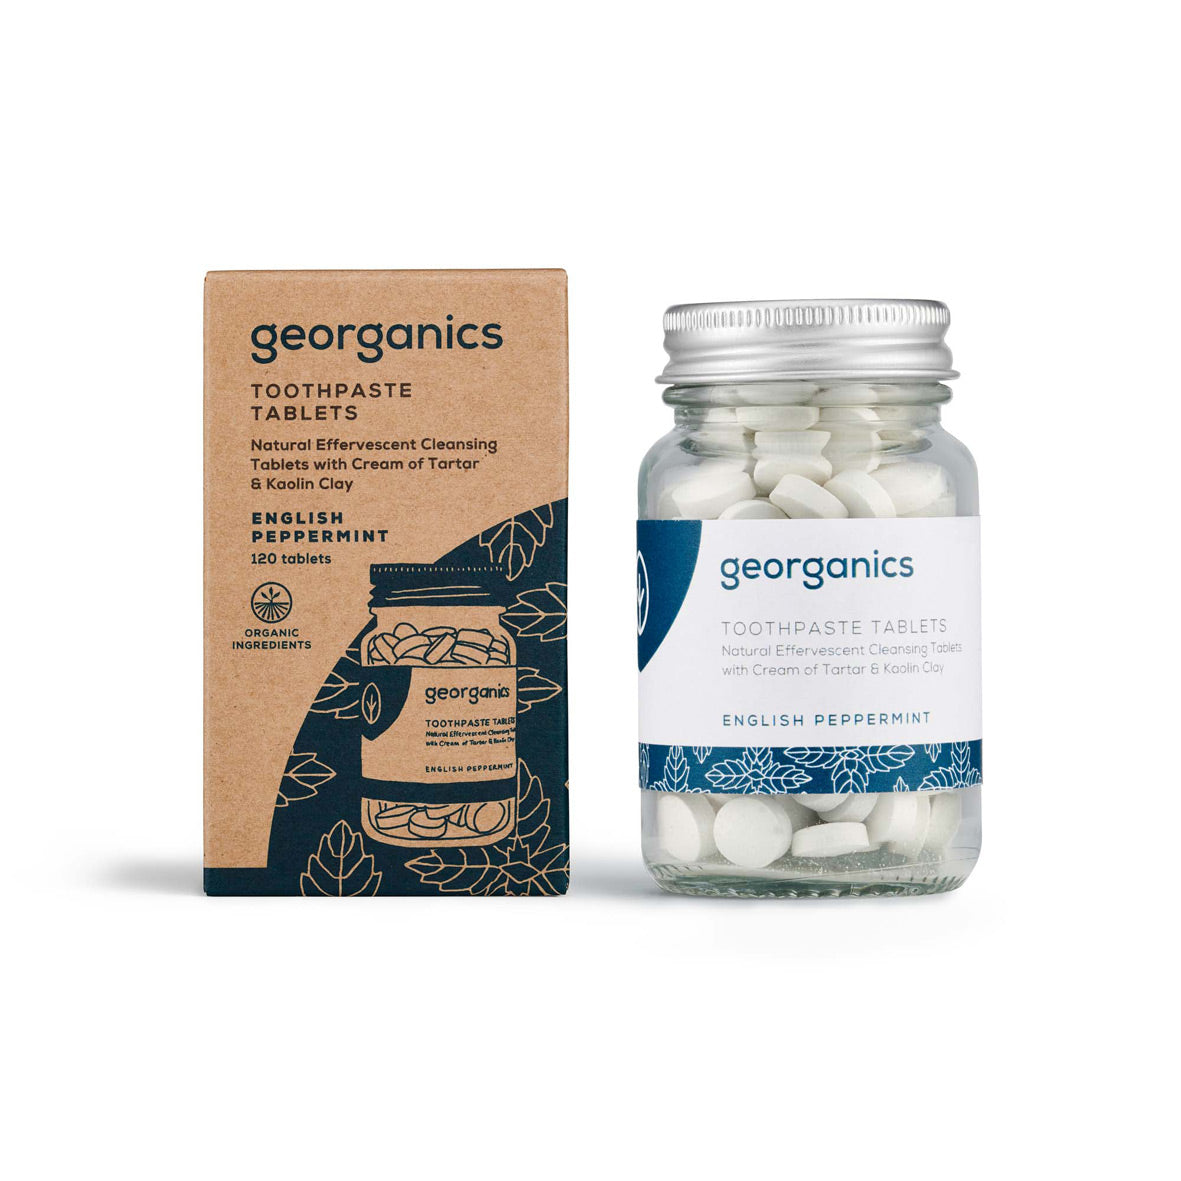 Georganics Toothpaste Tablets English Peppermint with Packaging